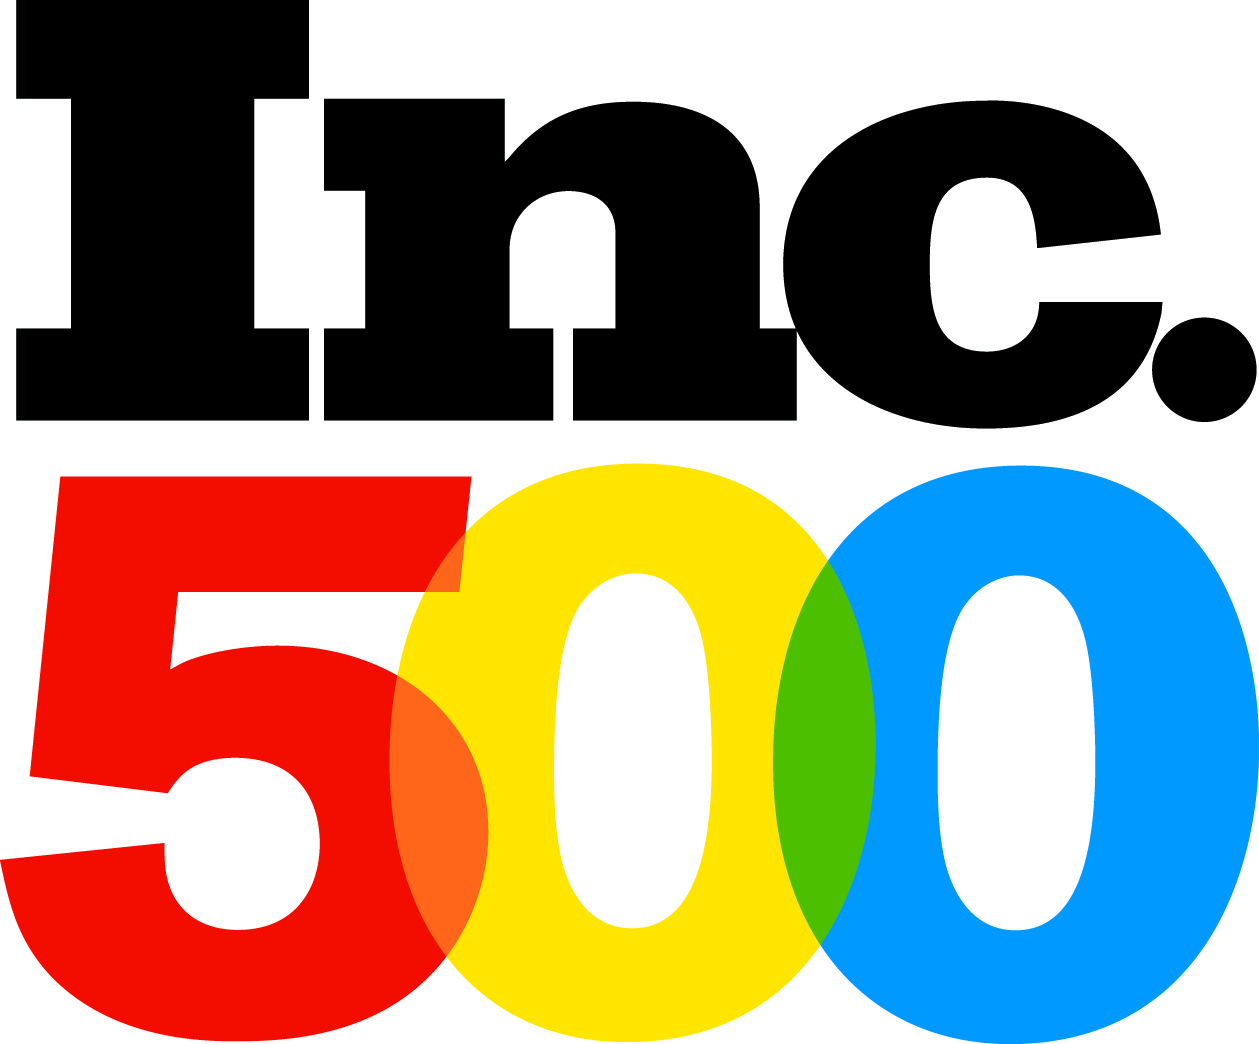 Adscend Media was named to the 2013 Inc. 500 List due to a 1,123% growth in earnings from 2009 to 2012.